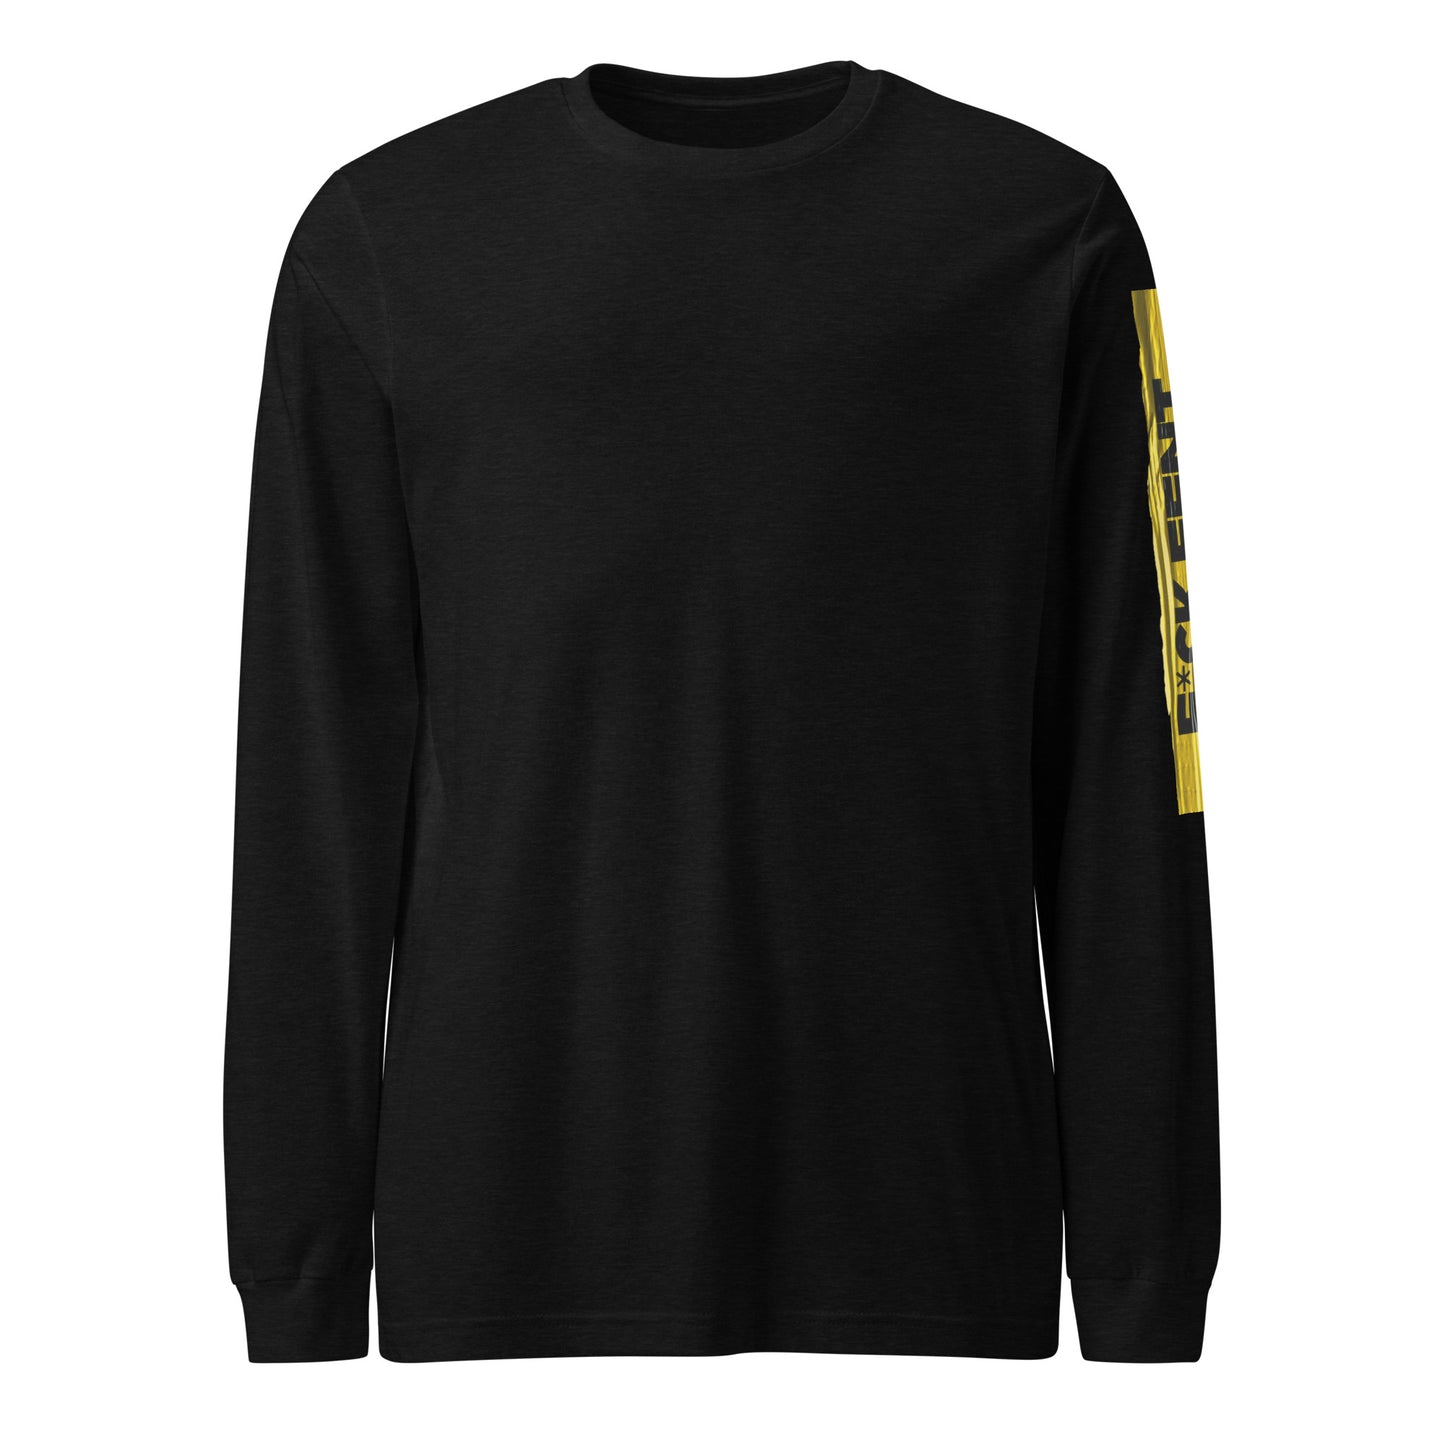 Taped off Long Tee (7 colors)